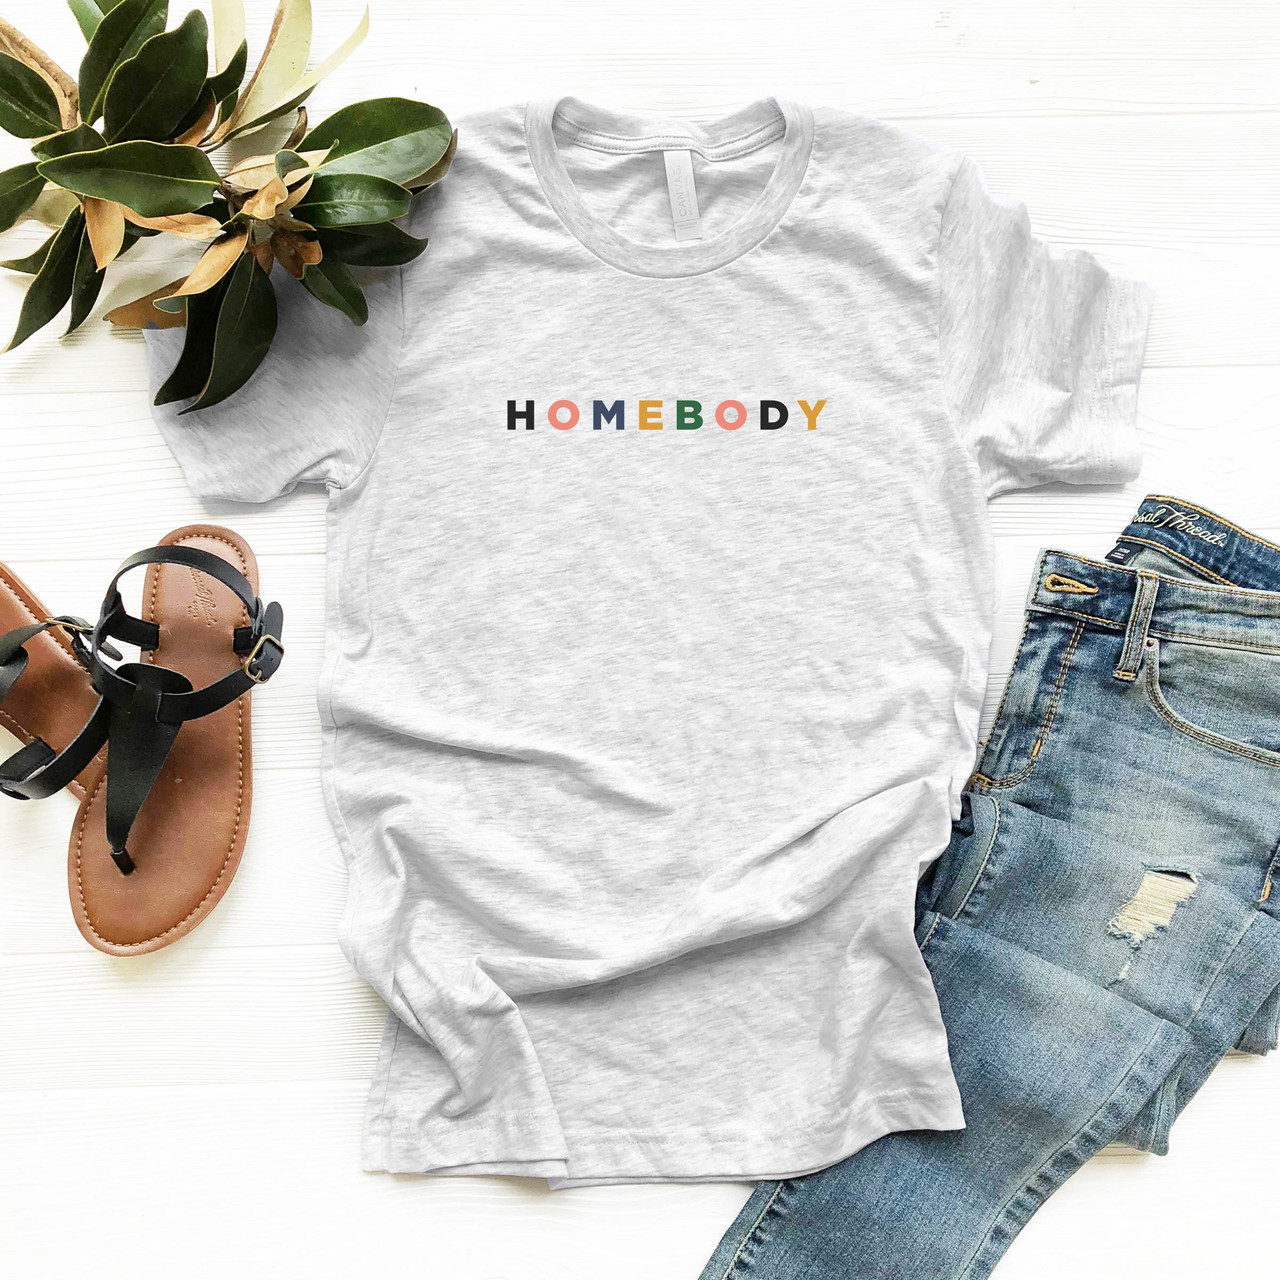 HOMEBODY Vintage T-Shirt (Color on Light Gray Fleck) from The Printed Home